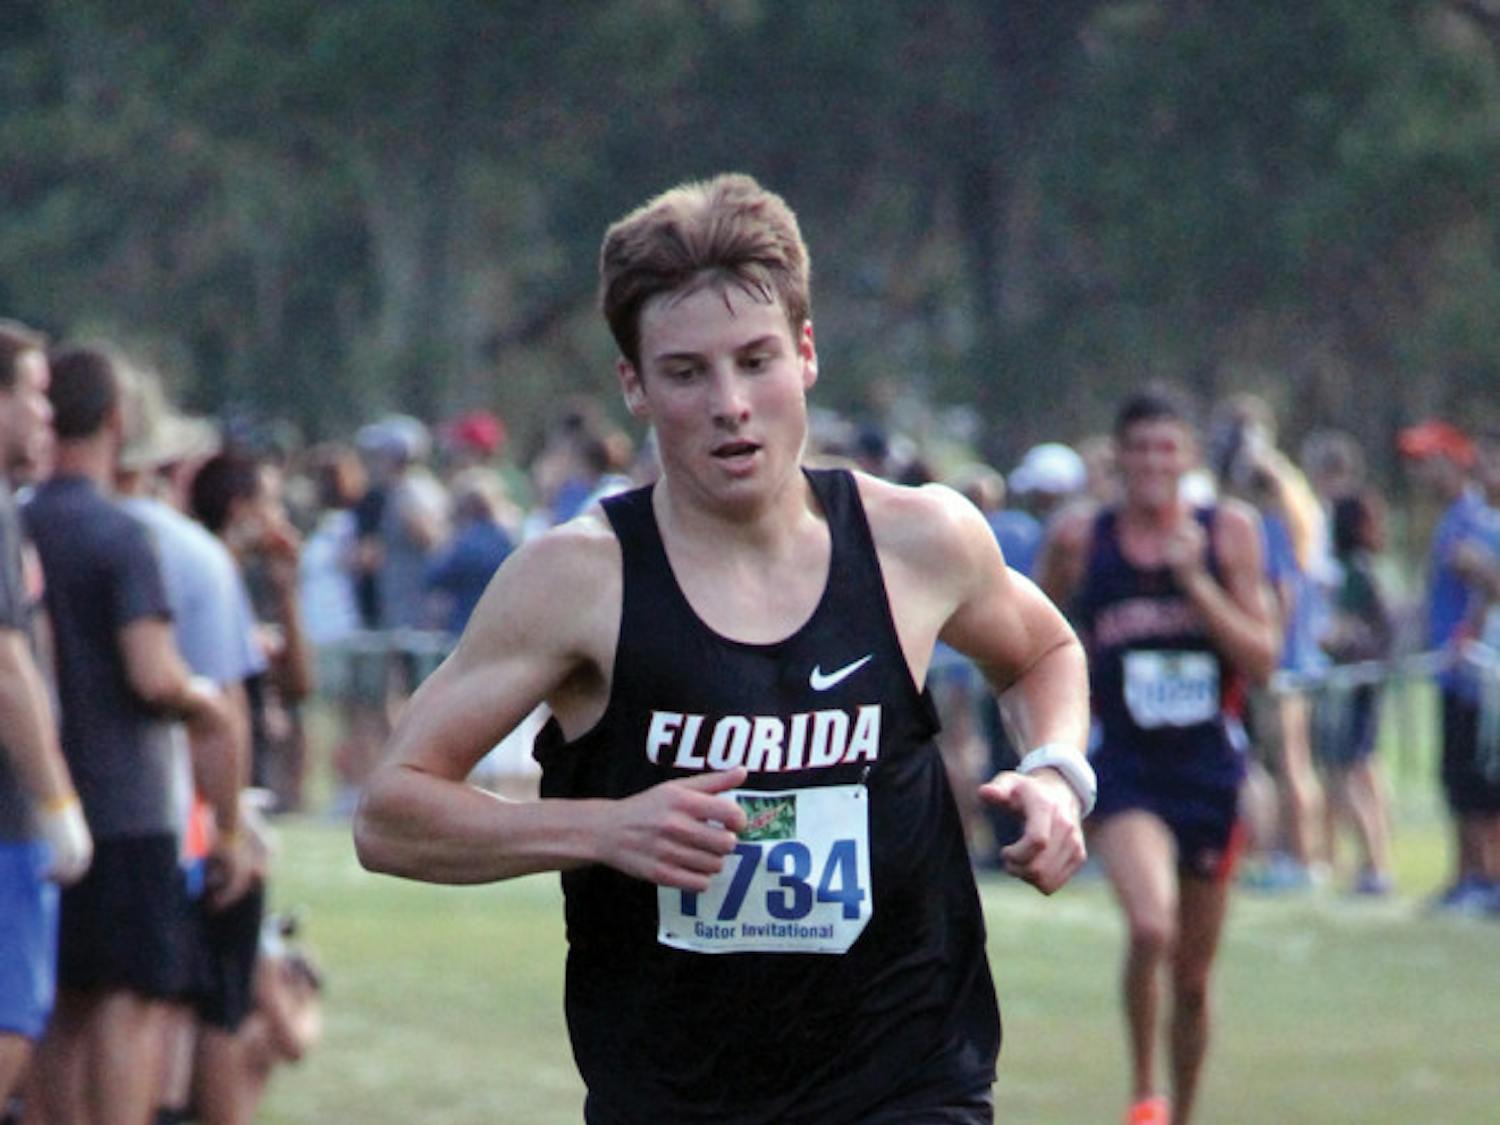 Jimmy Clark runs at the Mountain Dew Invitational on Saturday in Gainesville. Clark won his race in 23:53.78.